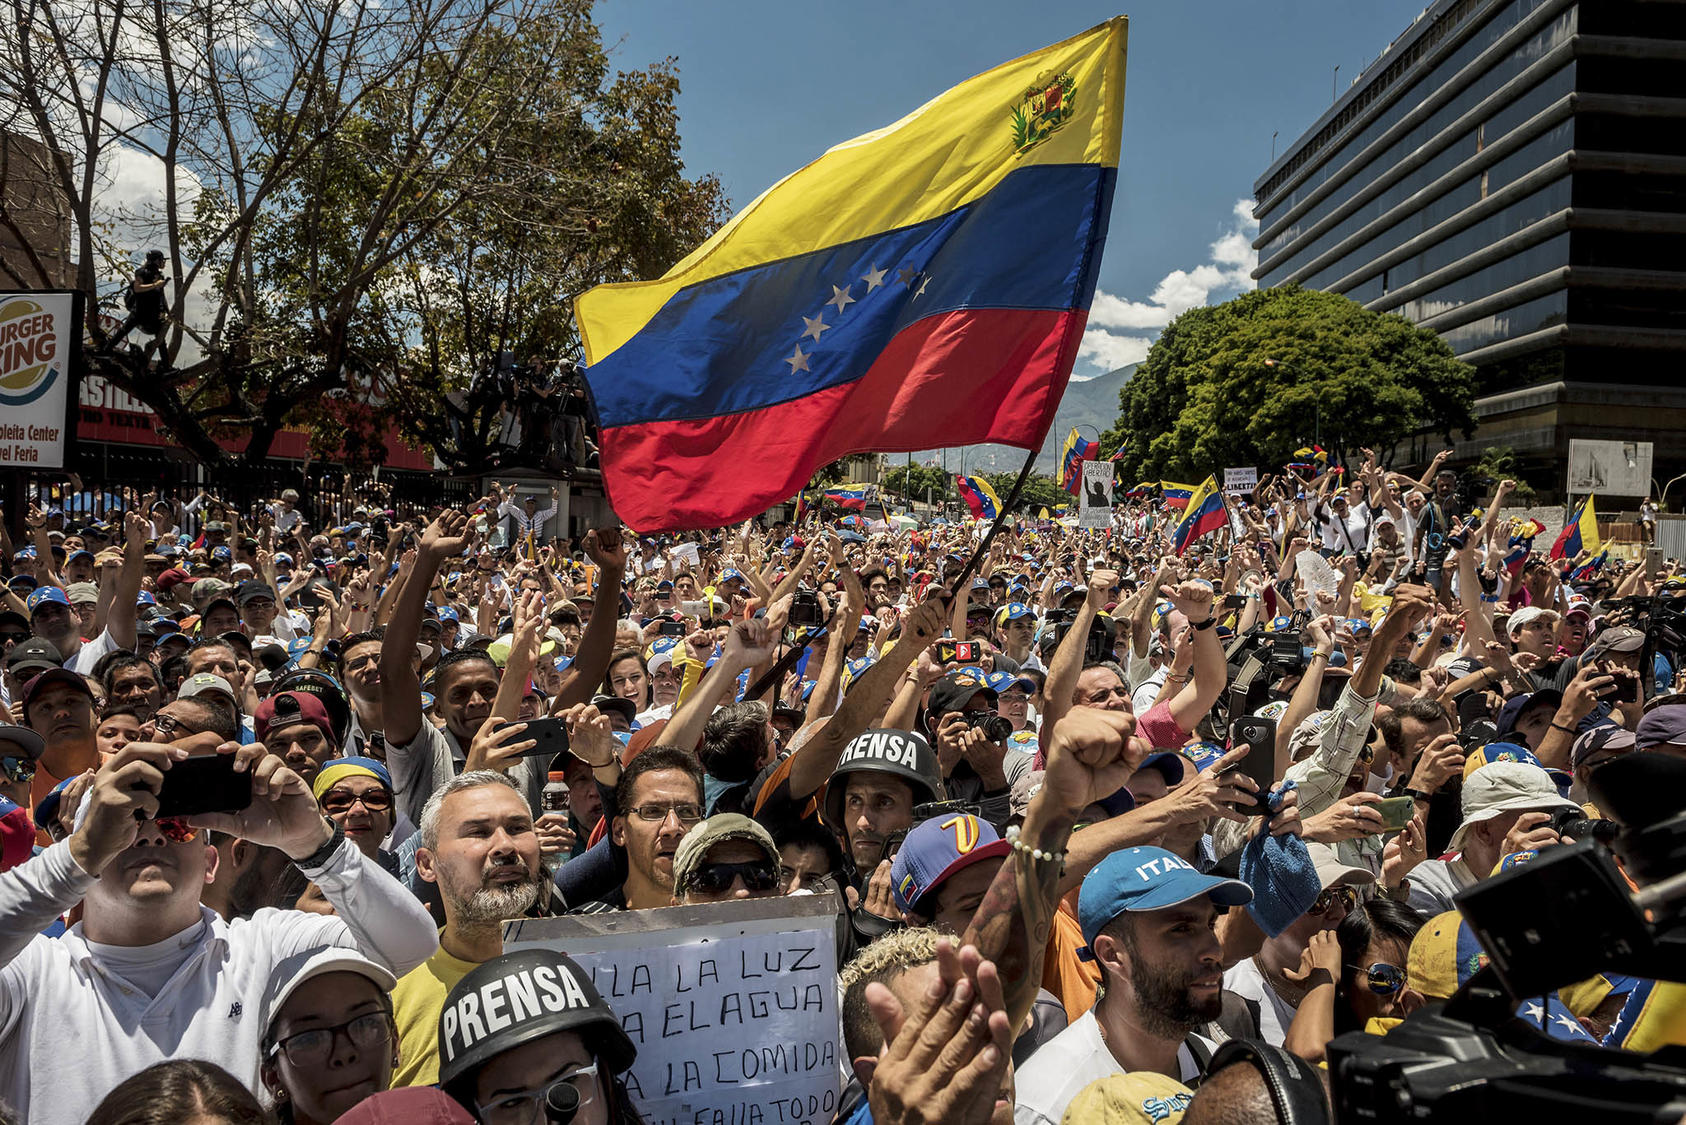 Venezuelans, most of them young, rally in April to demand a democratic transition for their country. Venezuela has a history of political protest movements led by youth. (Meridith Kohut/The New York Times)